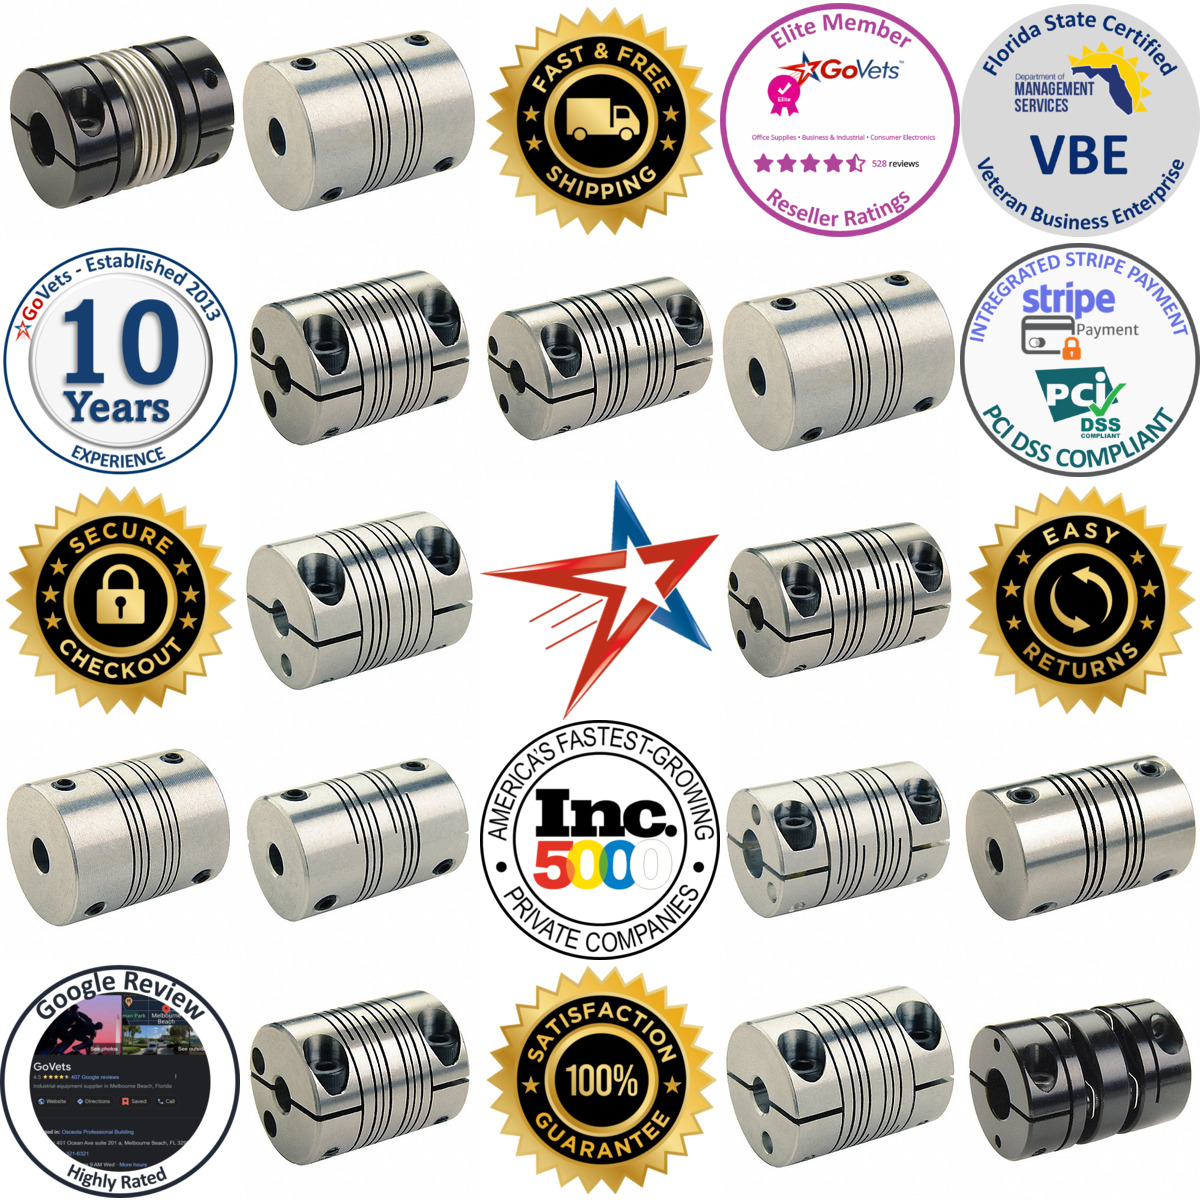 A selection of Motion Control Couplings products on GoVets